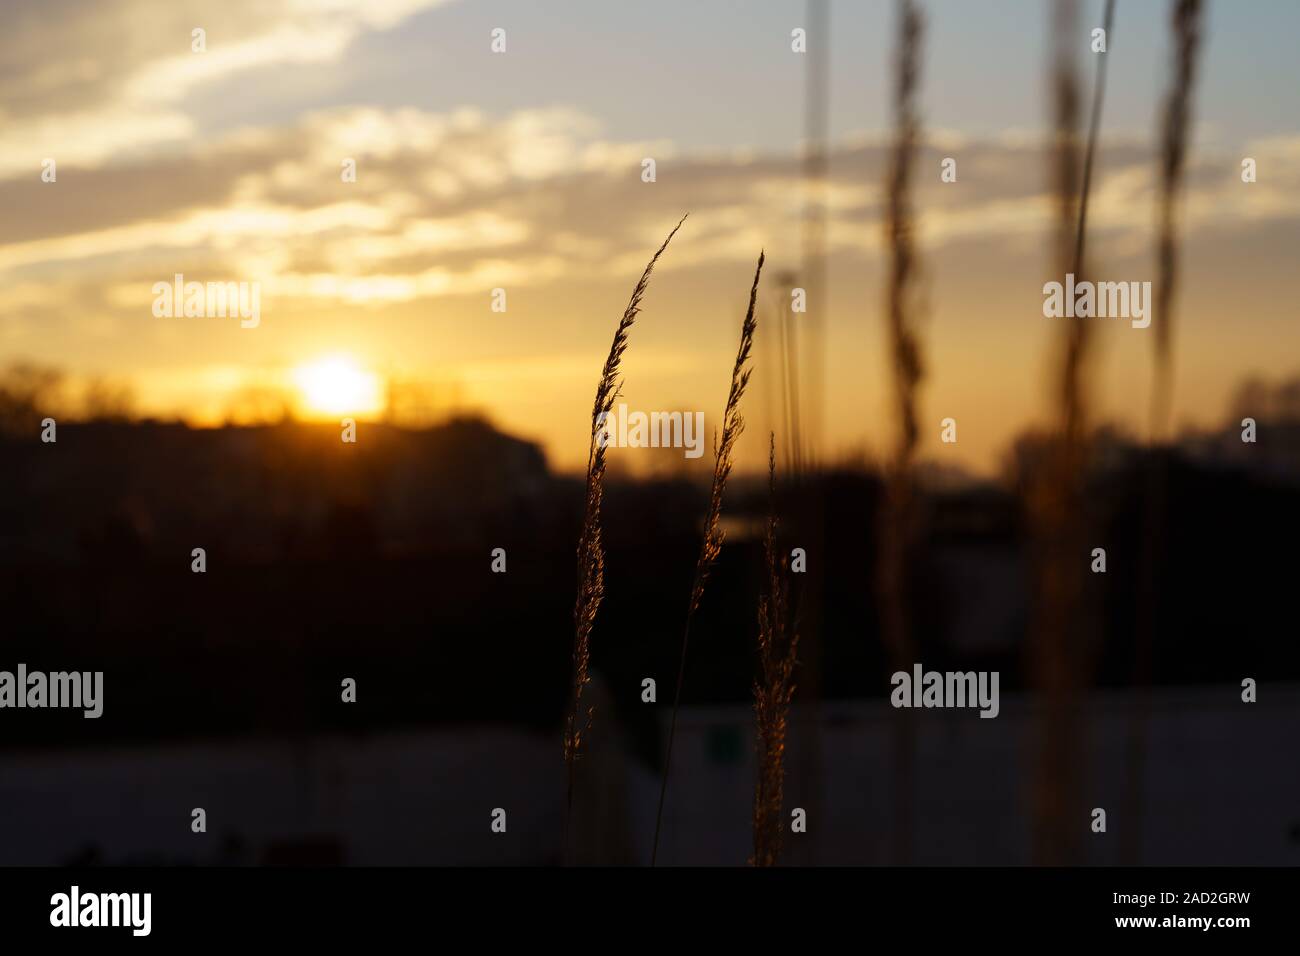 Sunset in Krakow Poland with grass in foreground in focus and a shallow depth of field Stock Photo